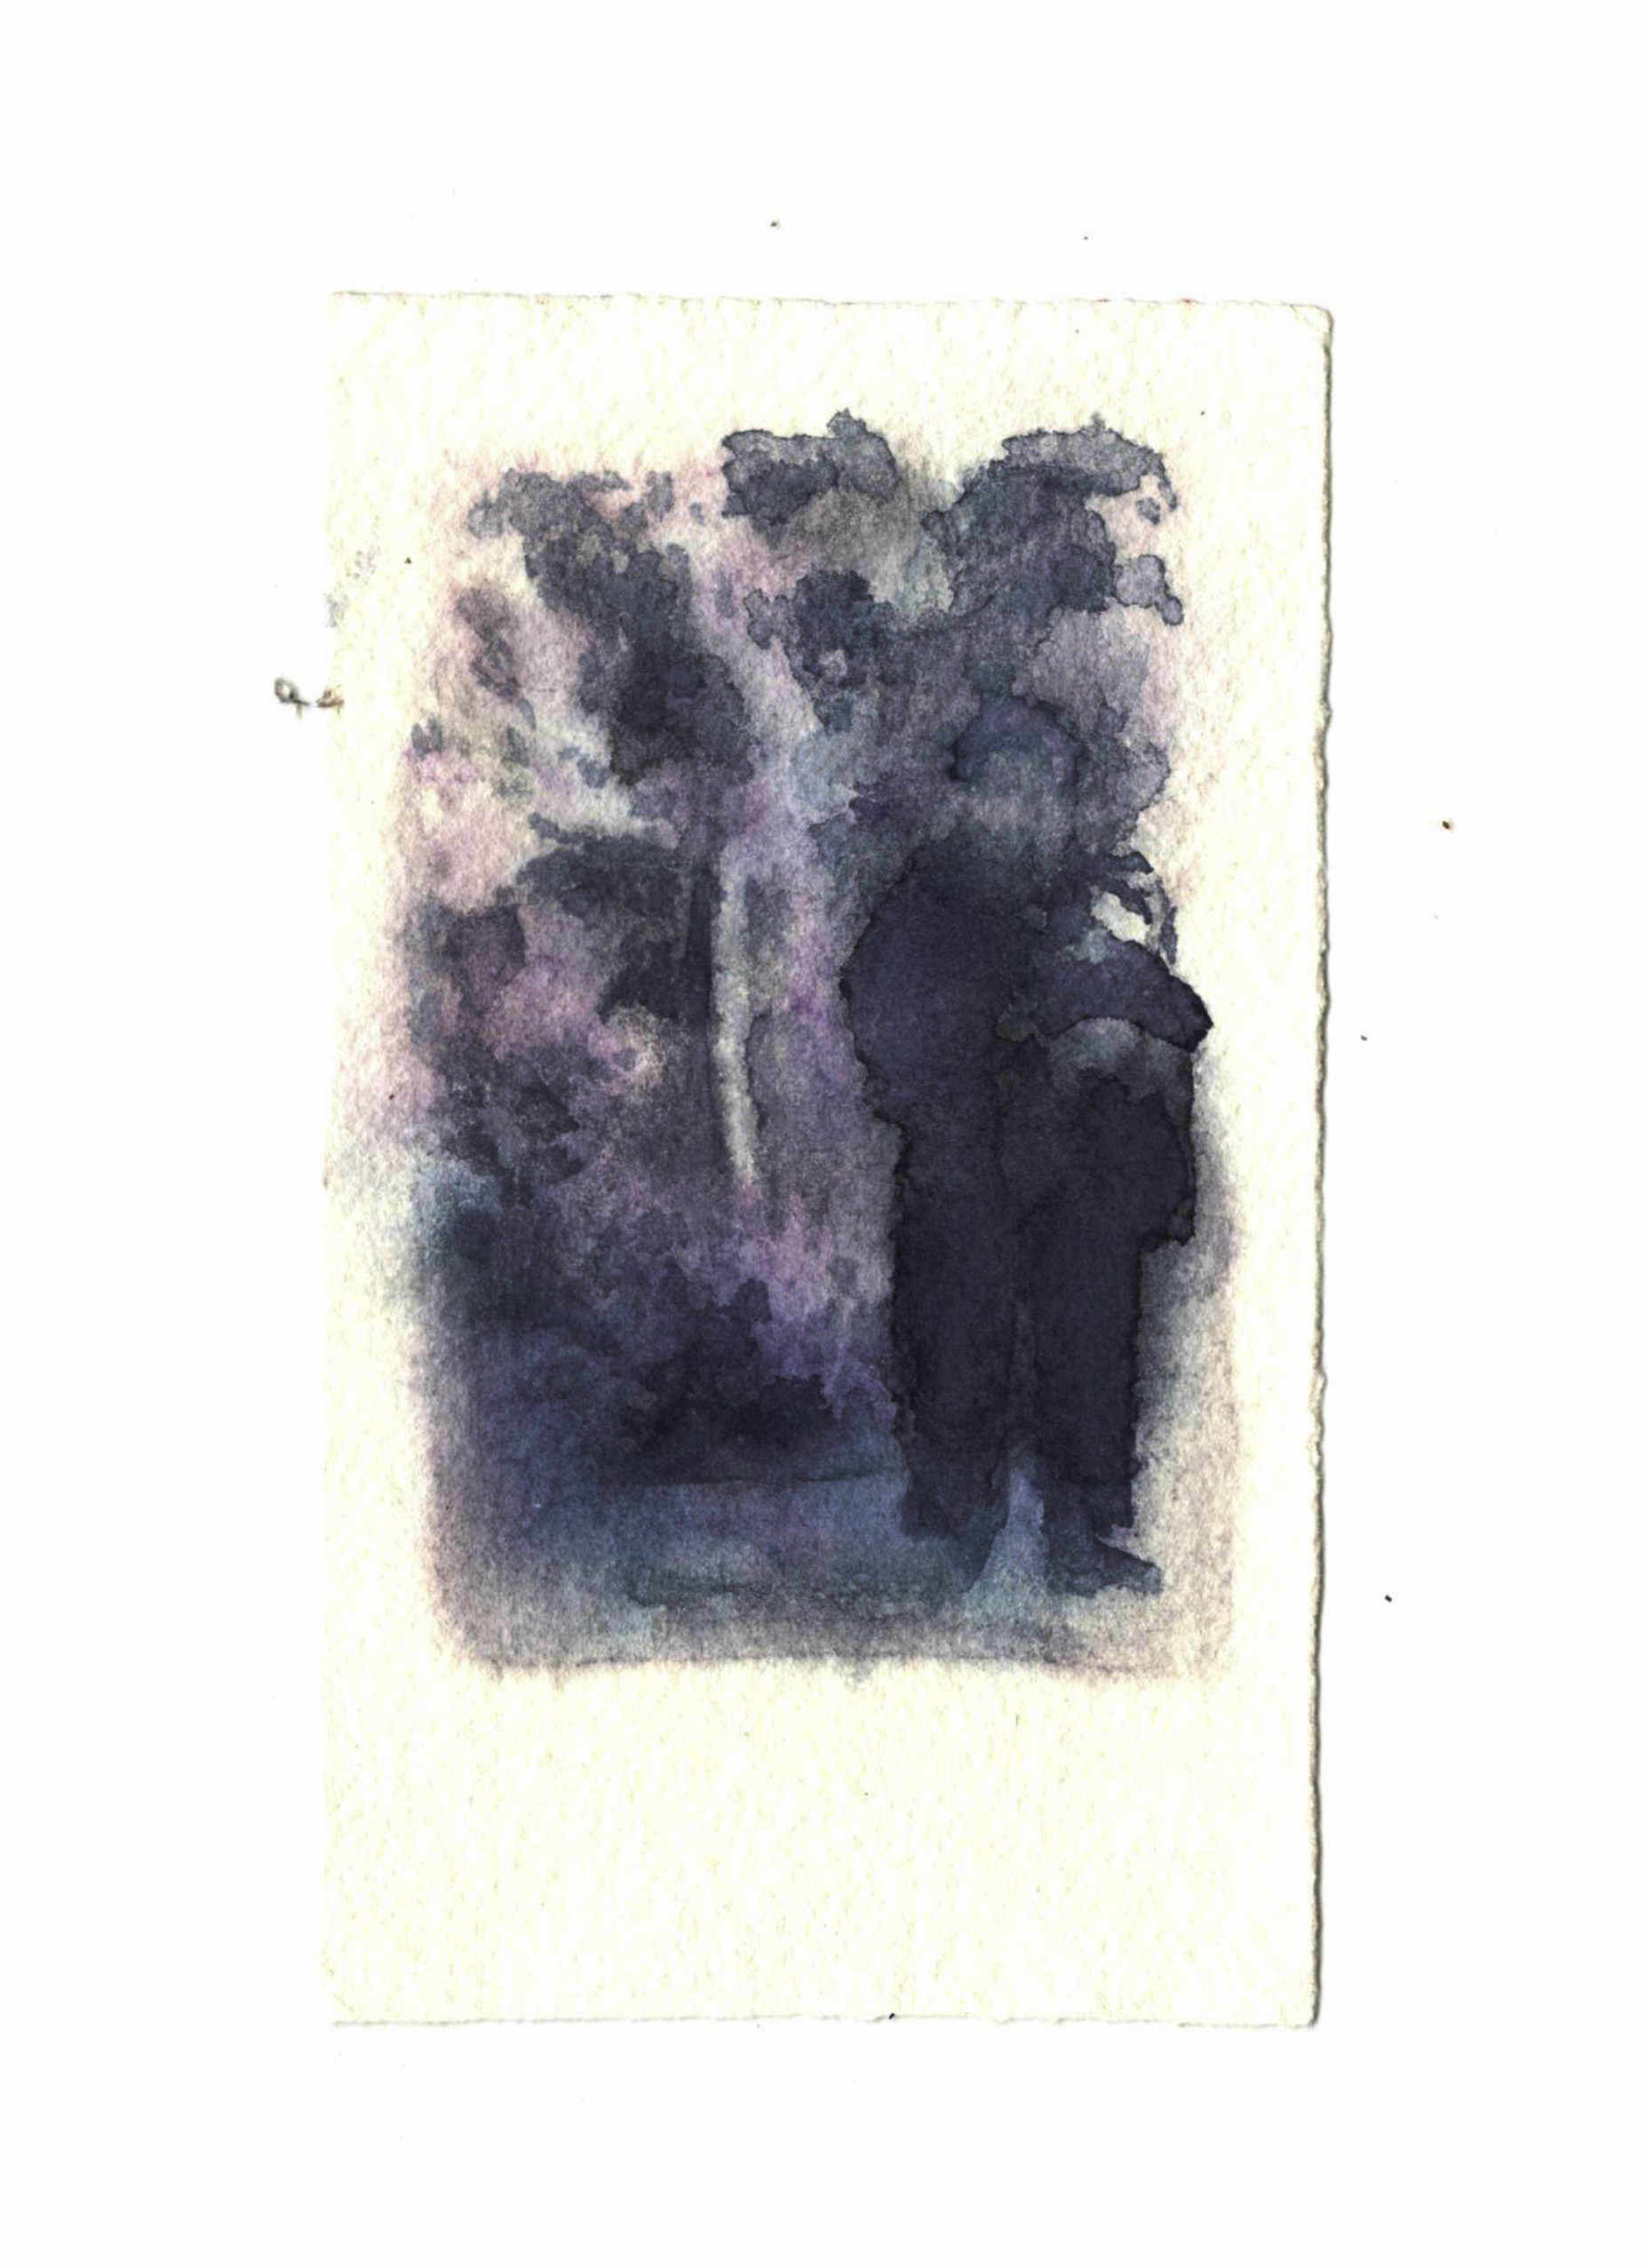 Grandpa and Olya. From the Family Roots series, 2020. Layering watercolours on wet paper distorts the image and renders it unrecognisable, just like our memory cannot offer a single clear portrait of a familiar person